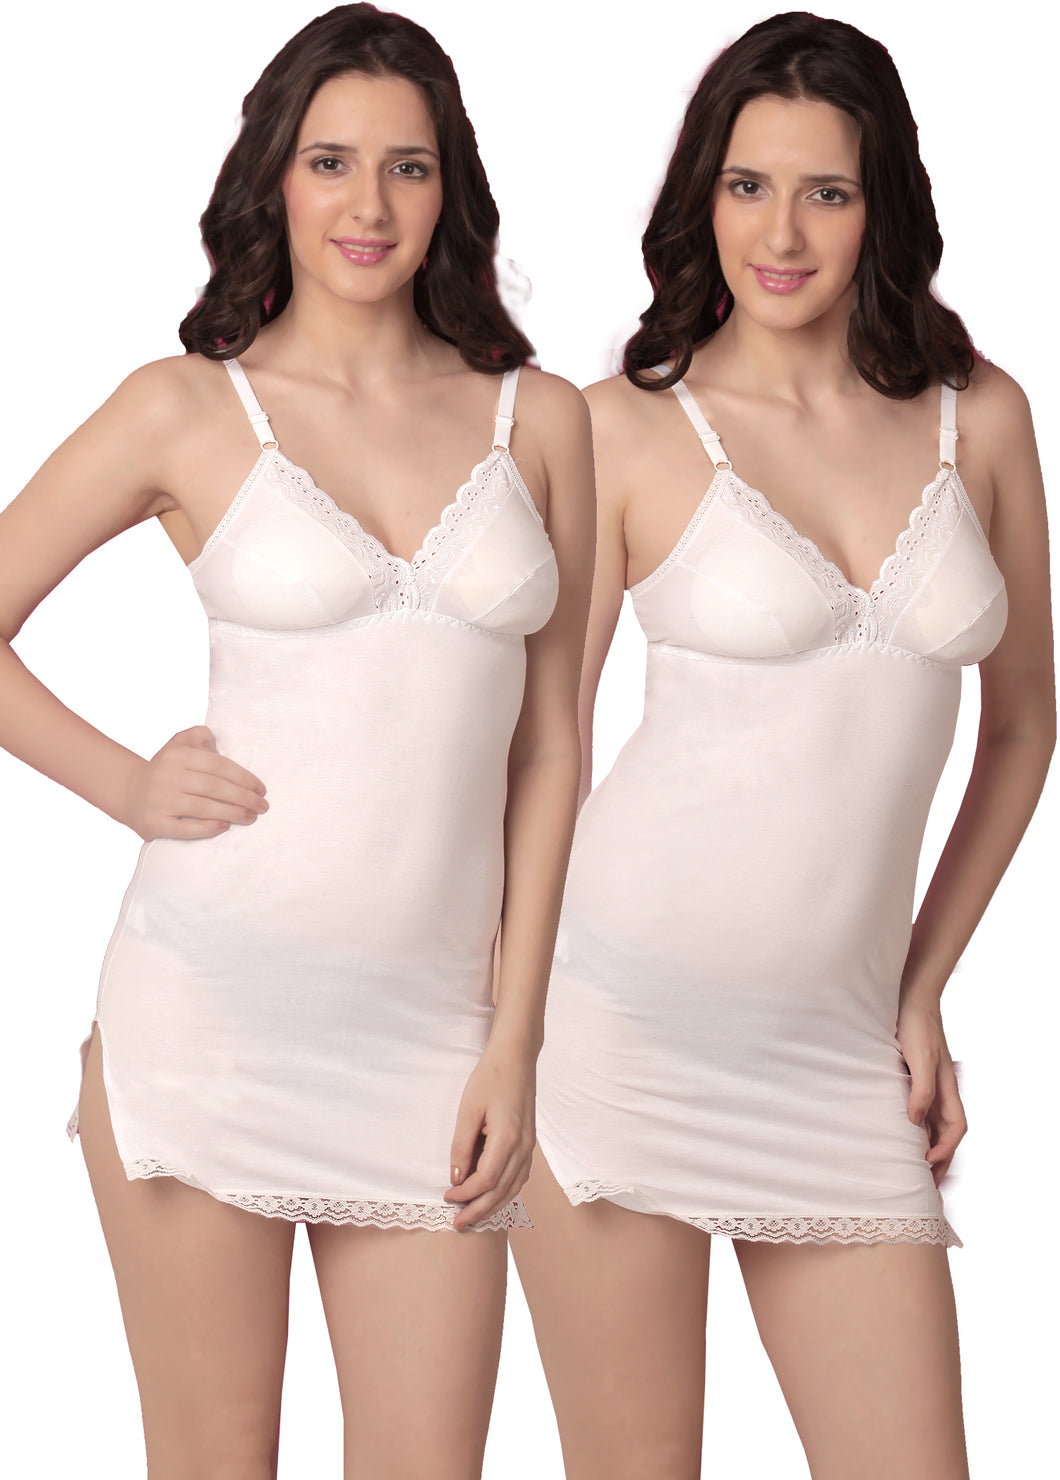 Sexy Night Dress For Women - Buy Sexy Night Dress For Women online at Best  Prices in India | Flipkart.com